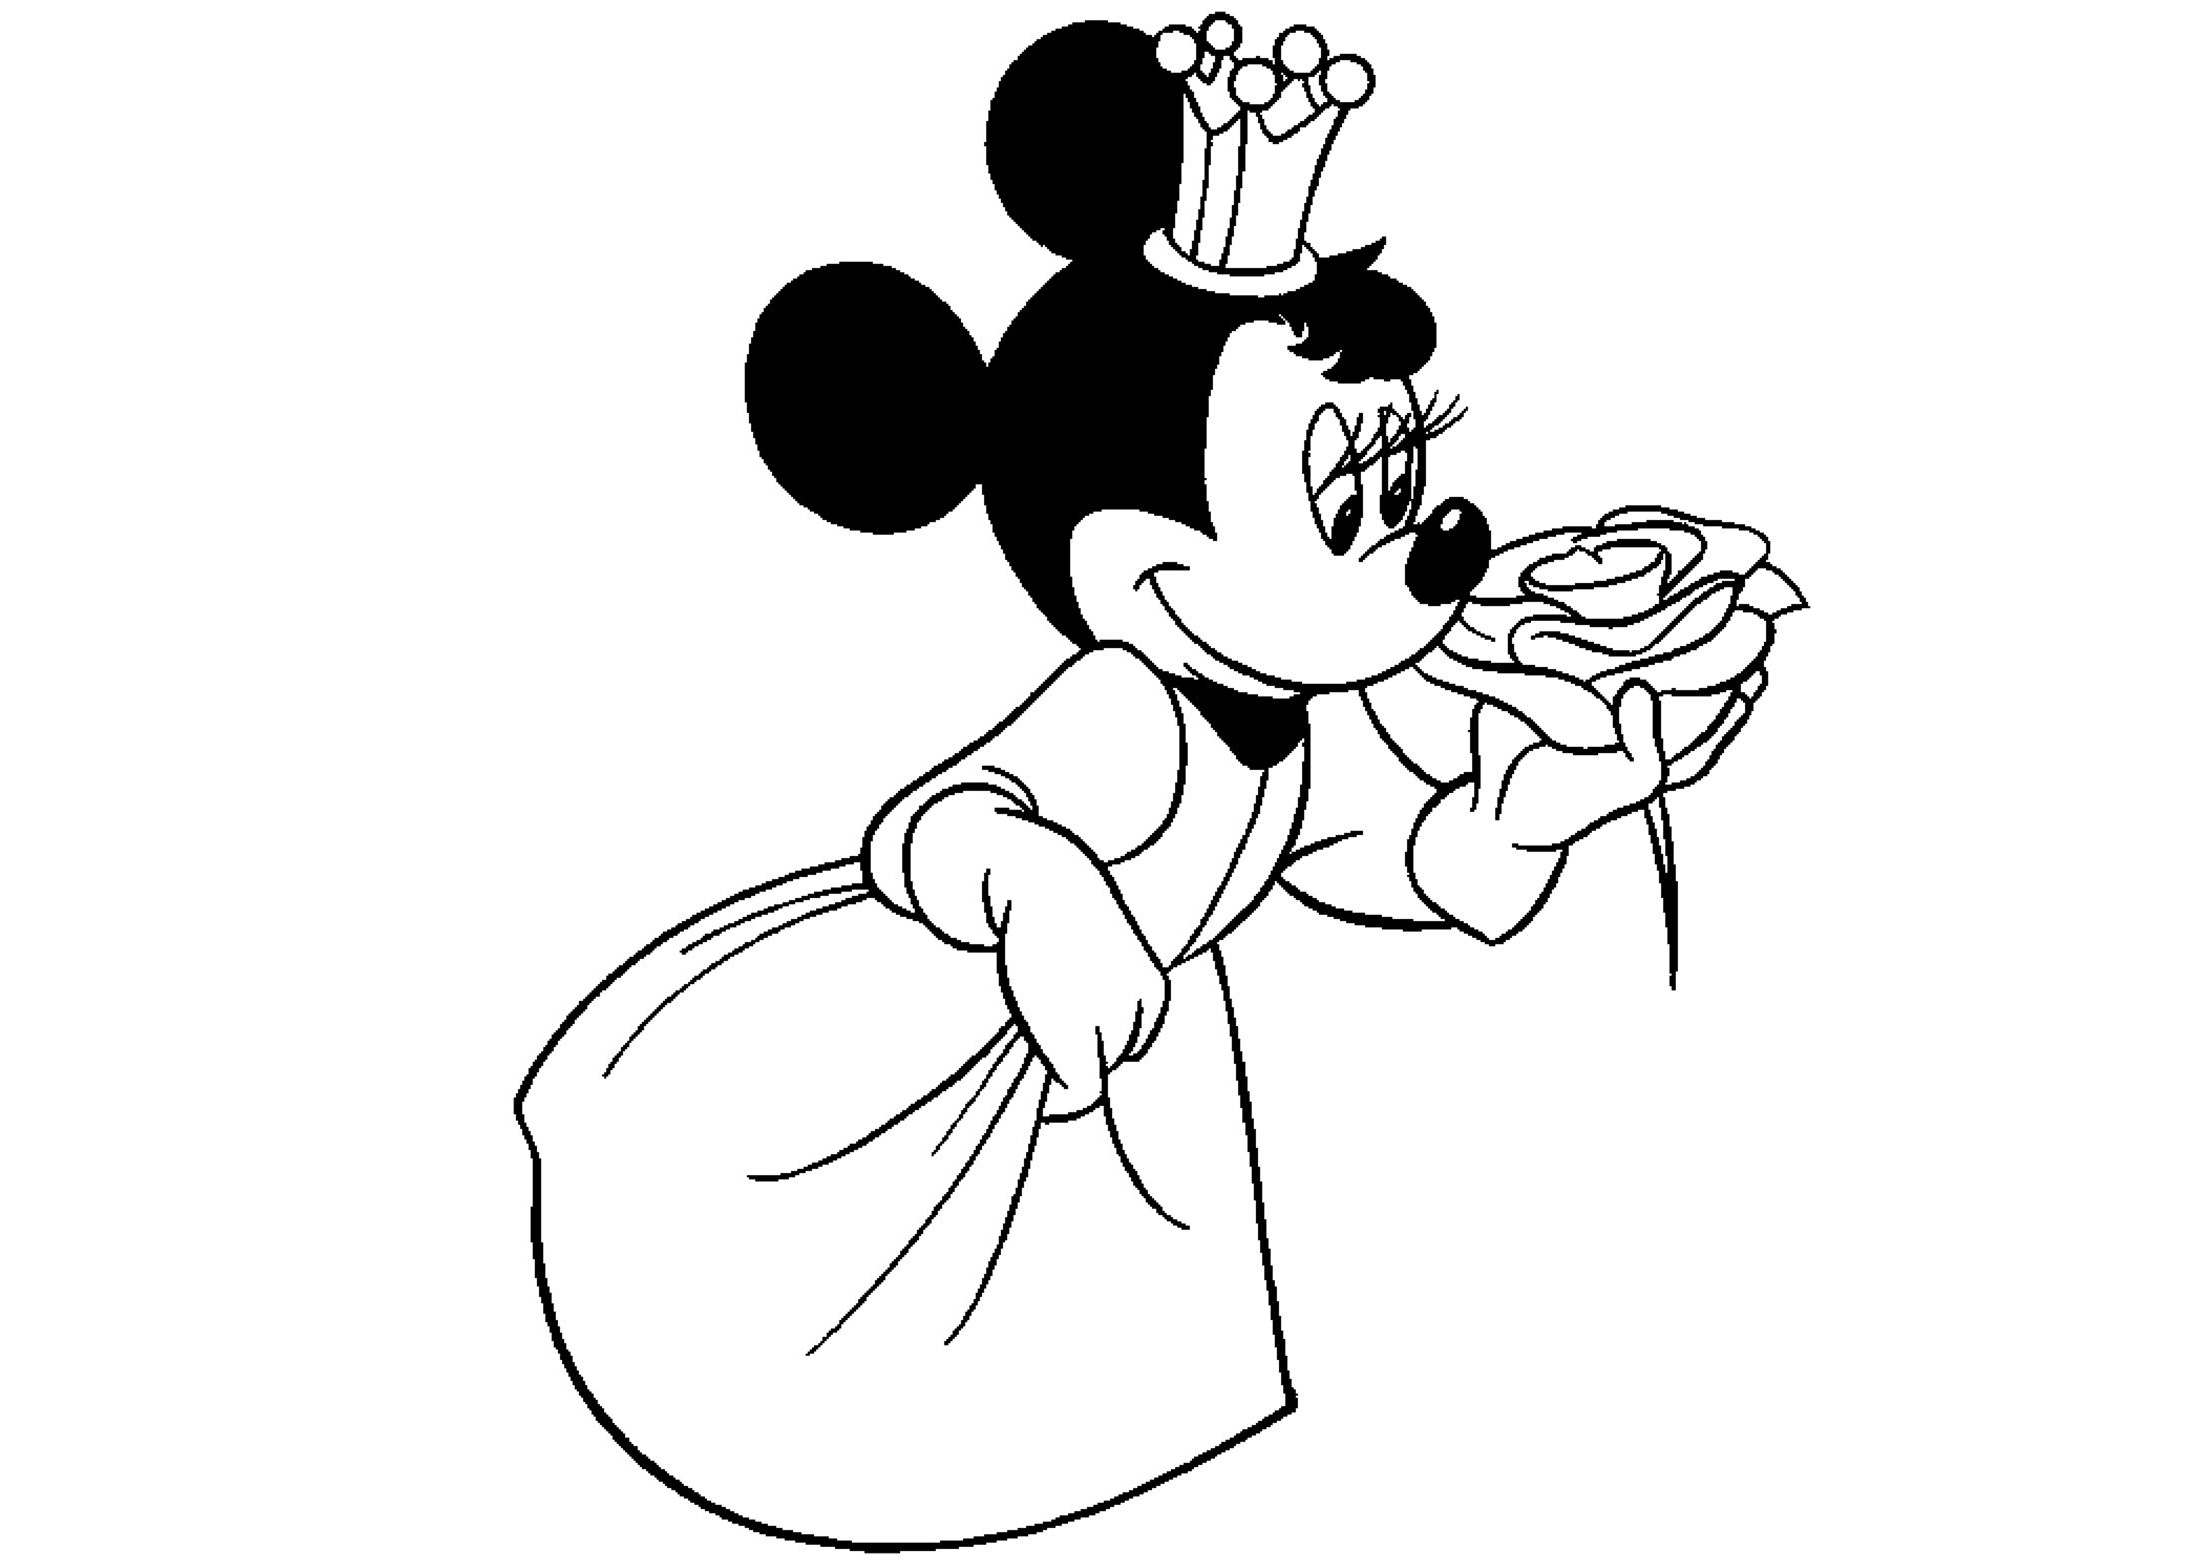 Princess Minnie Mouse Coloring Pages Minnie Mouse in Ballgown Dress and Crown Roaming Around Her Garden